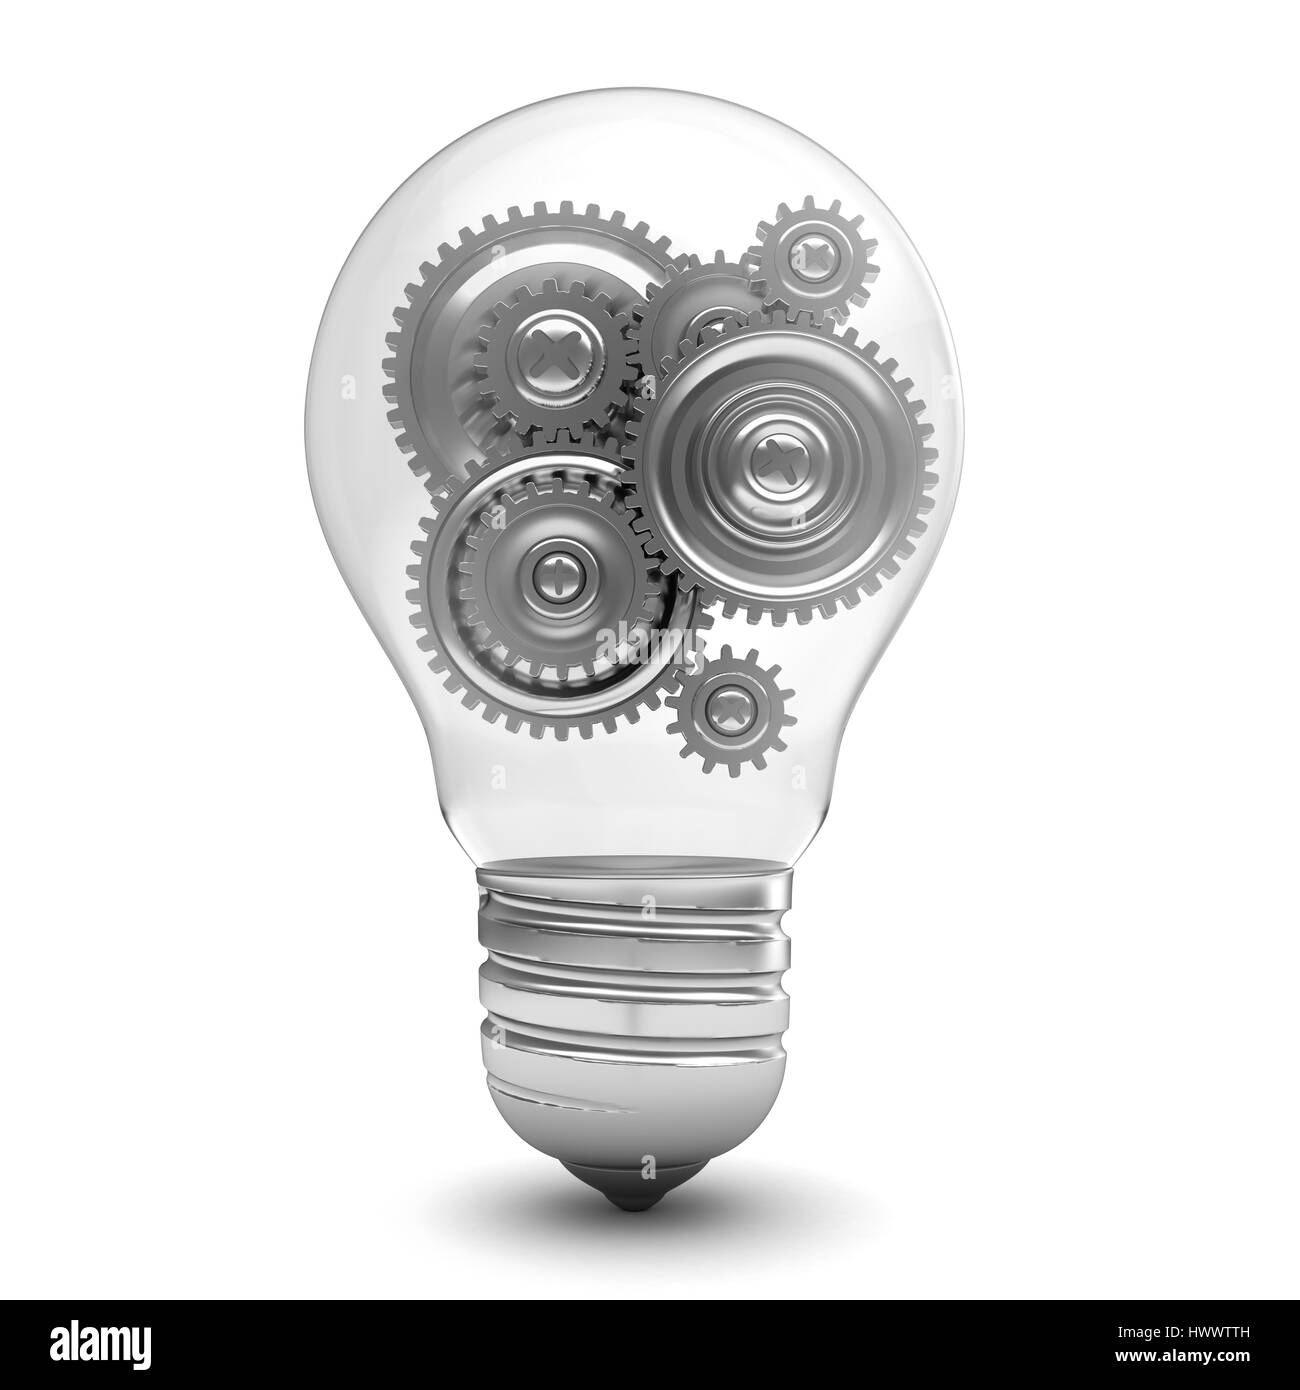 3d illustration of light bulb with gear wheels inside Stock Photo